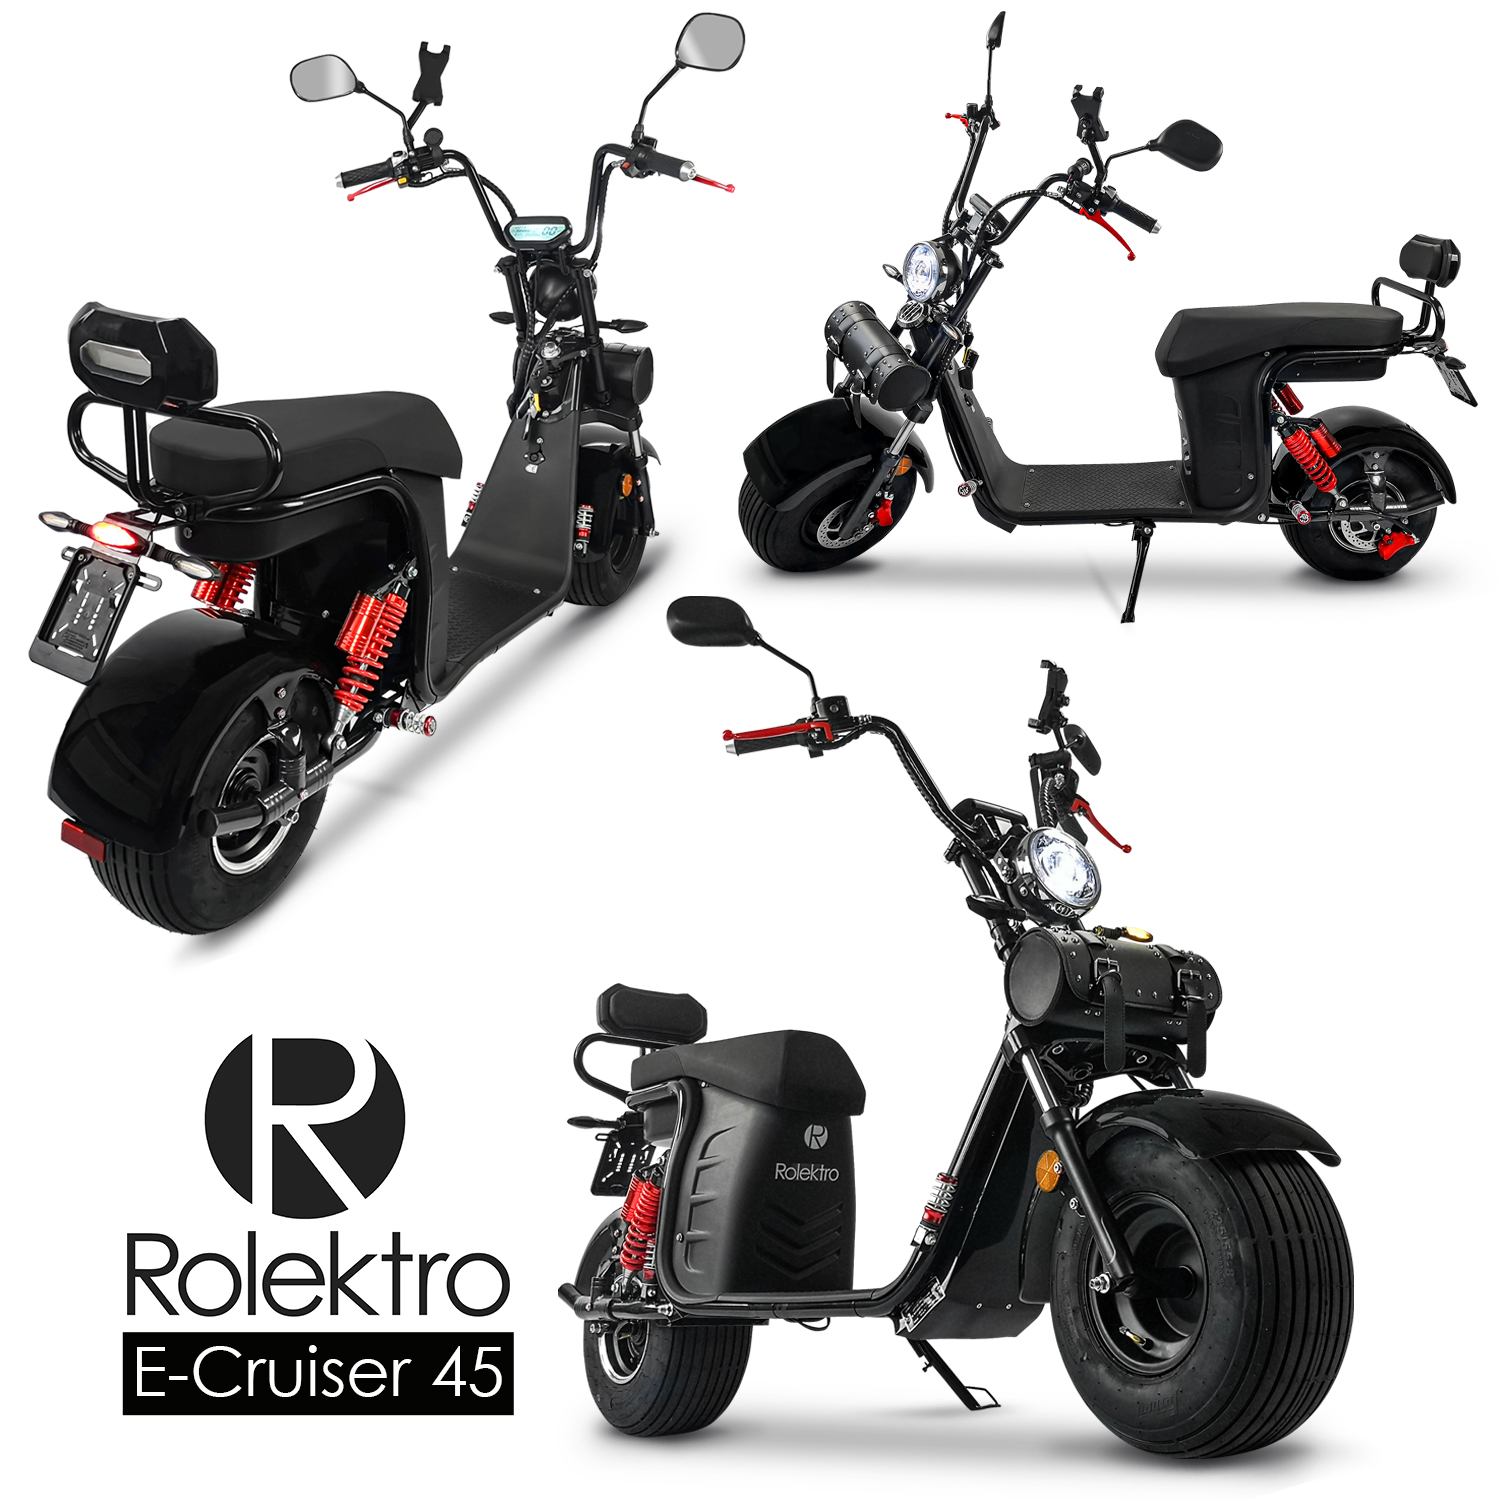 elektro2rad.de - Rolektro E-Cruiser 45 incl. 2 batteries electric scooter with  lithium battery